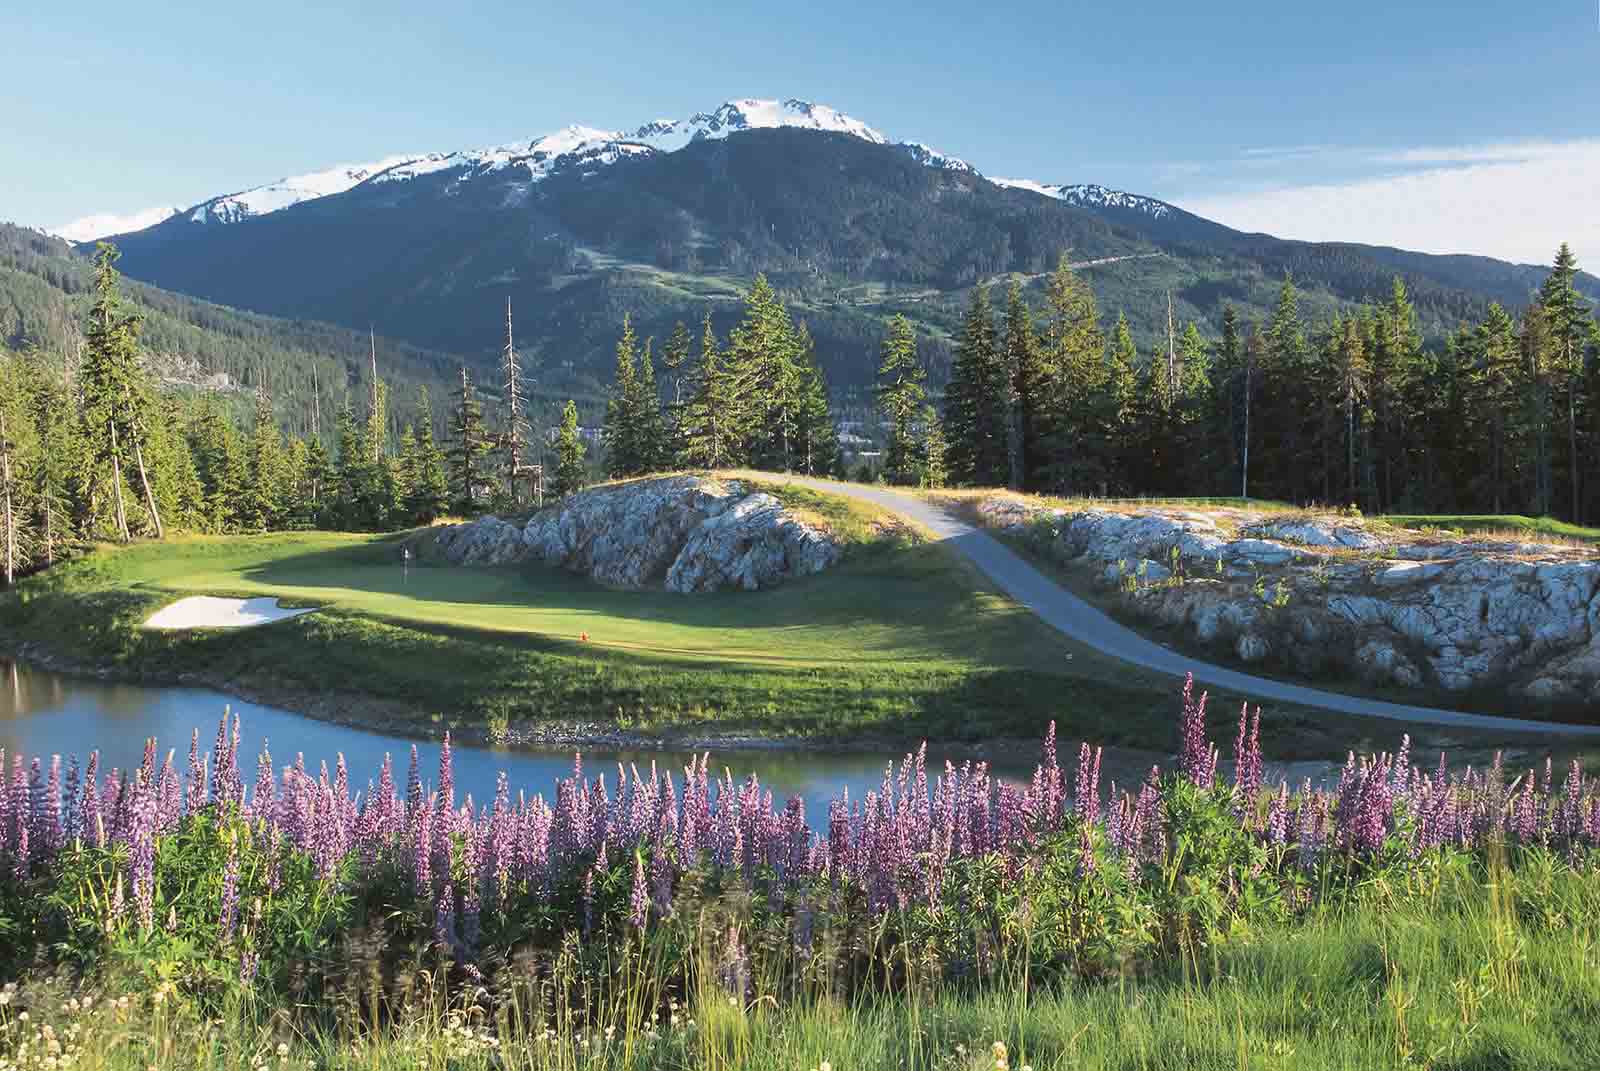 The golf course at Fairmont Chateau Whistler | Canada's stately chateaux